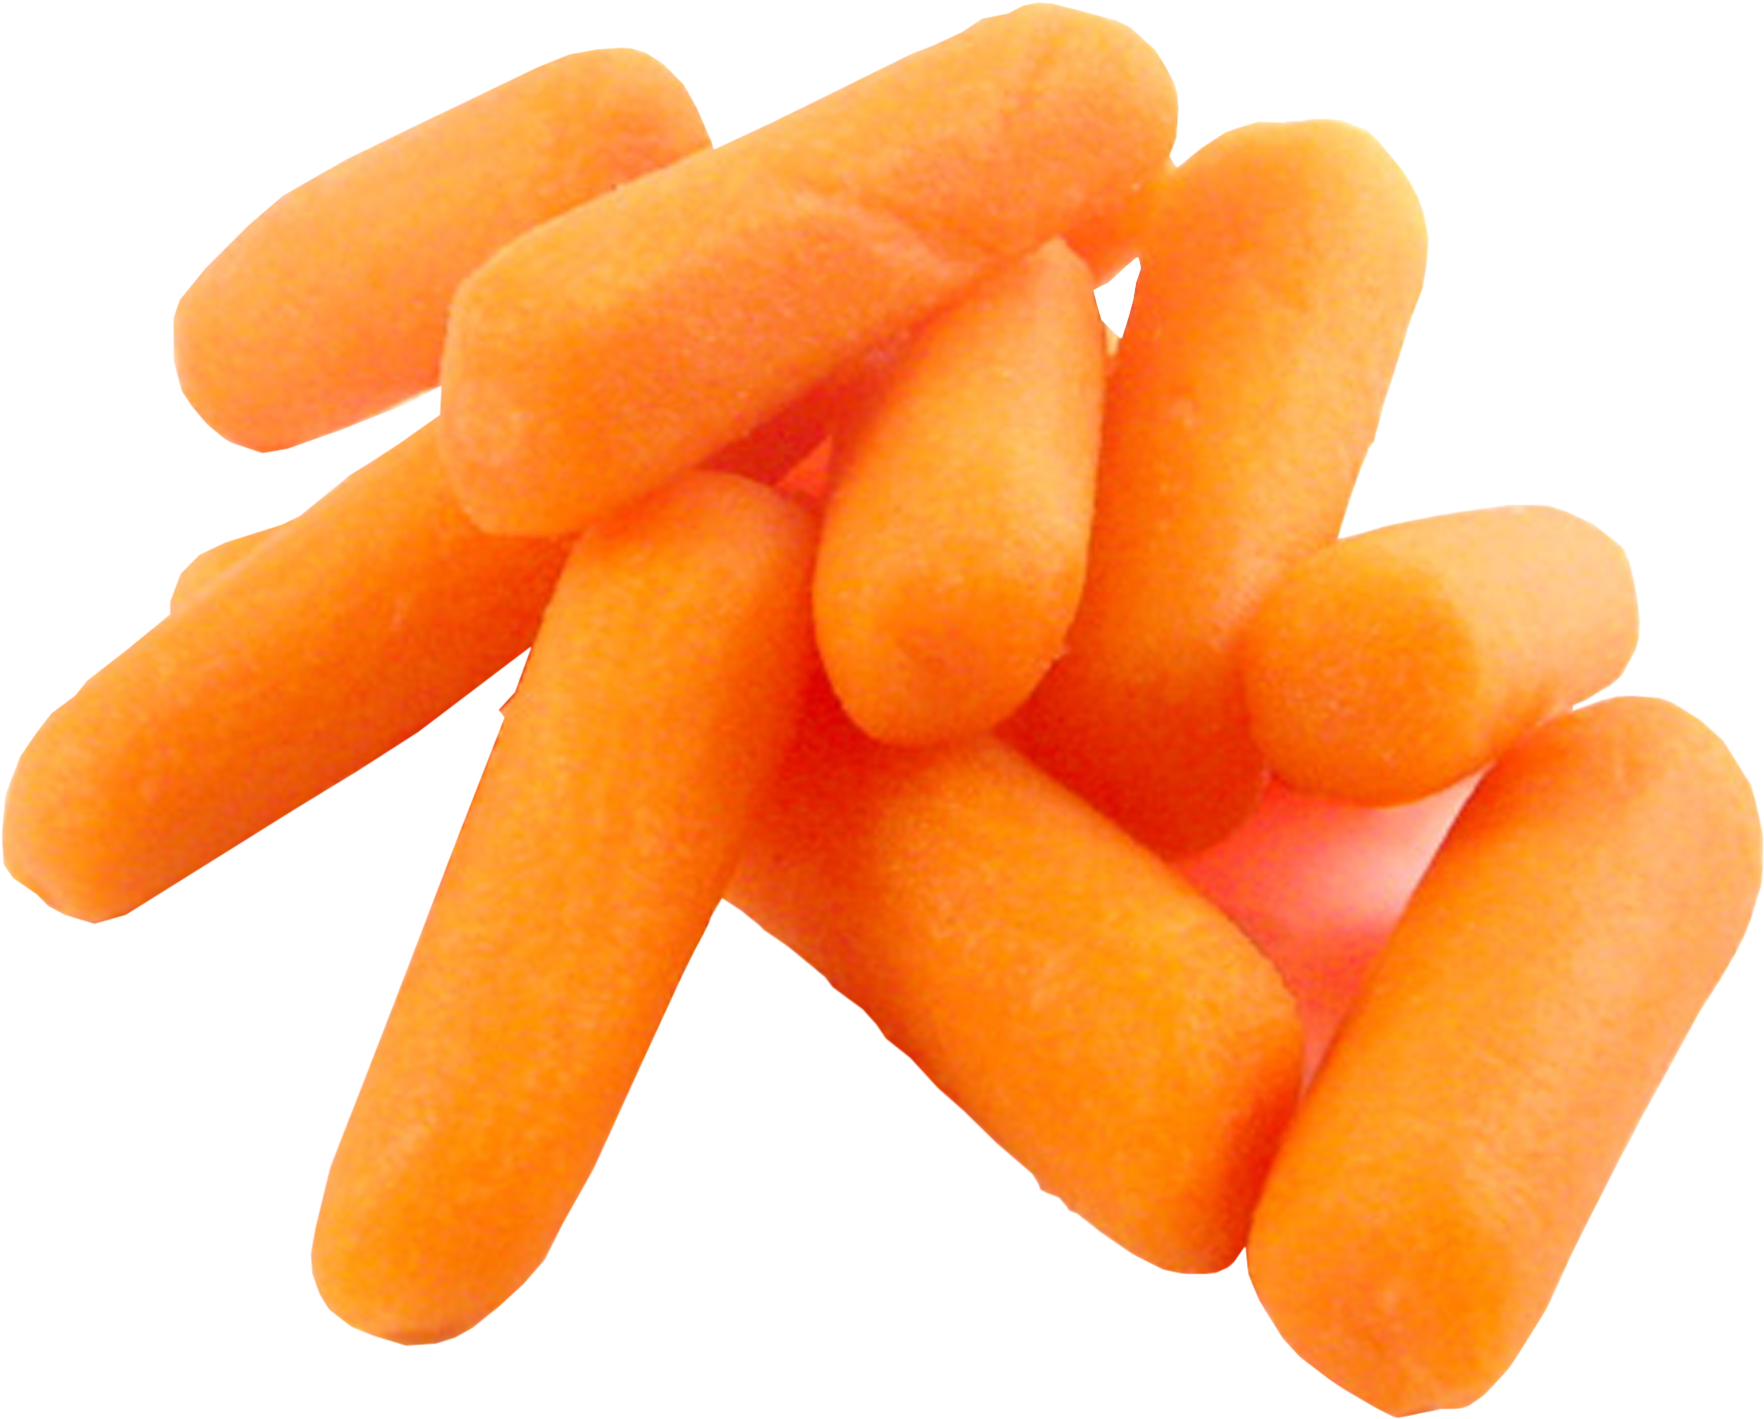 Fresh Baby Carrots Pile PNG image